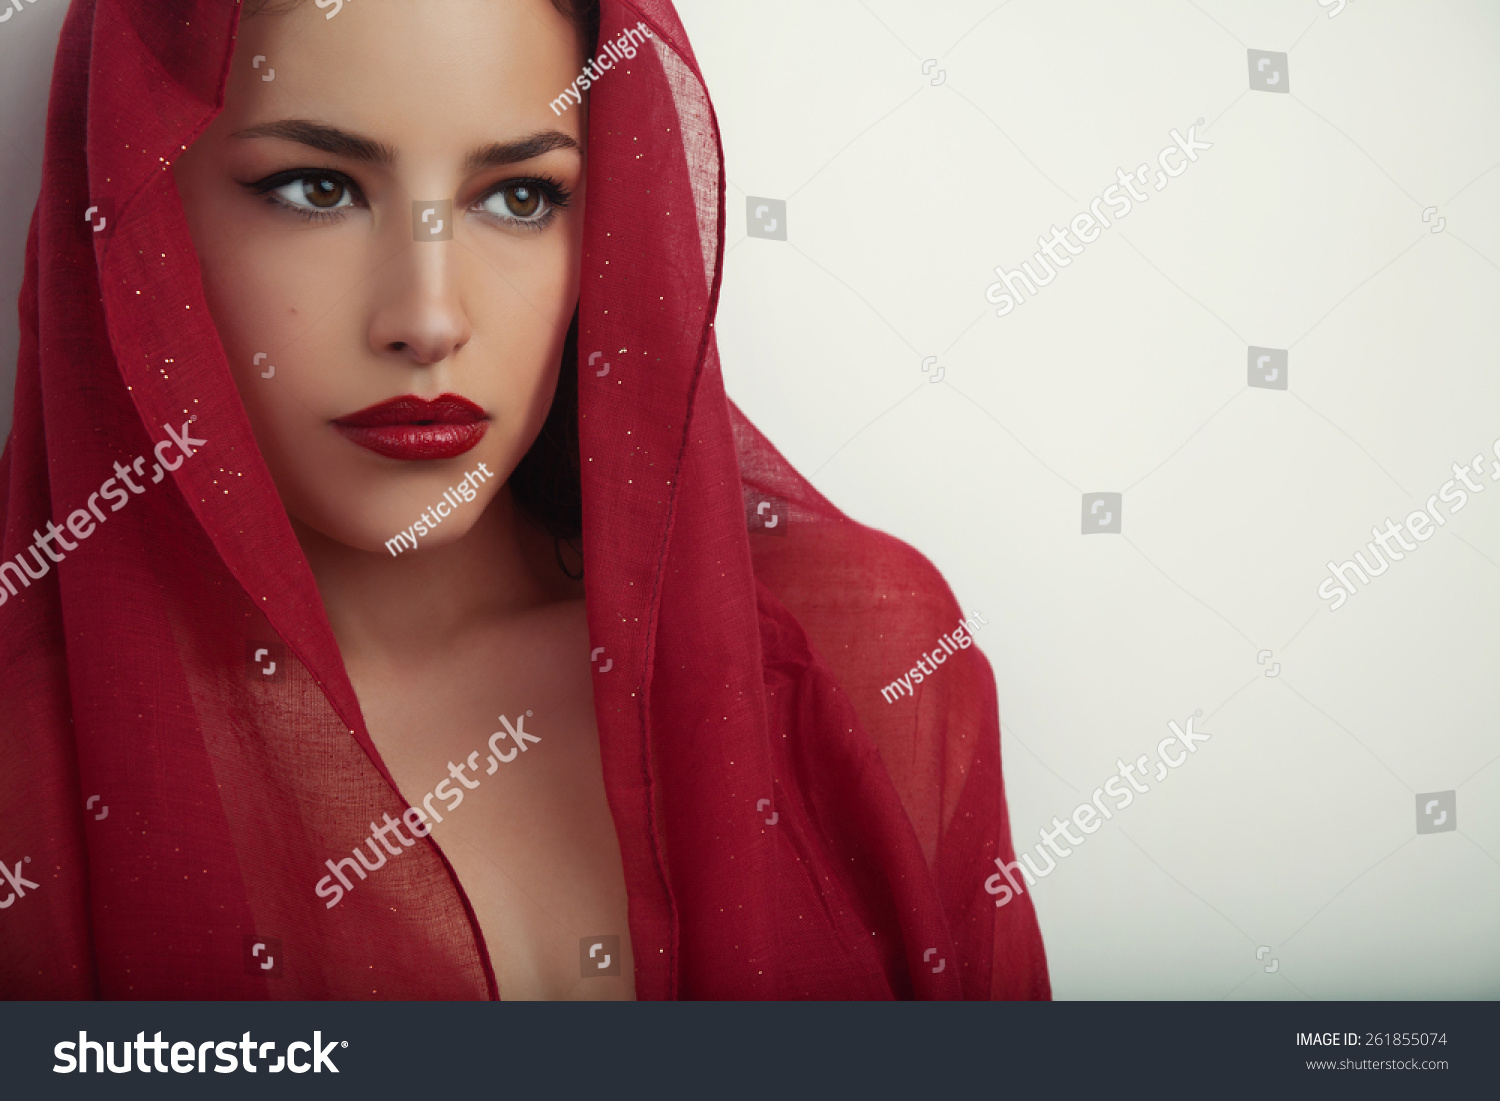 Beautiful Woman Portrait With Red Lips And Red Veil Over Her Head ...